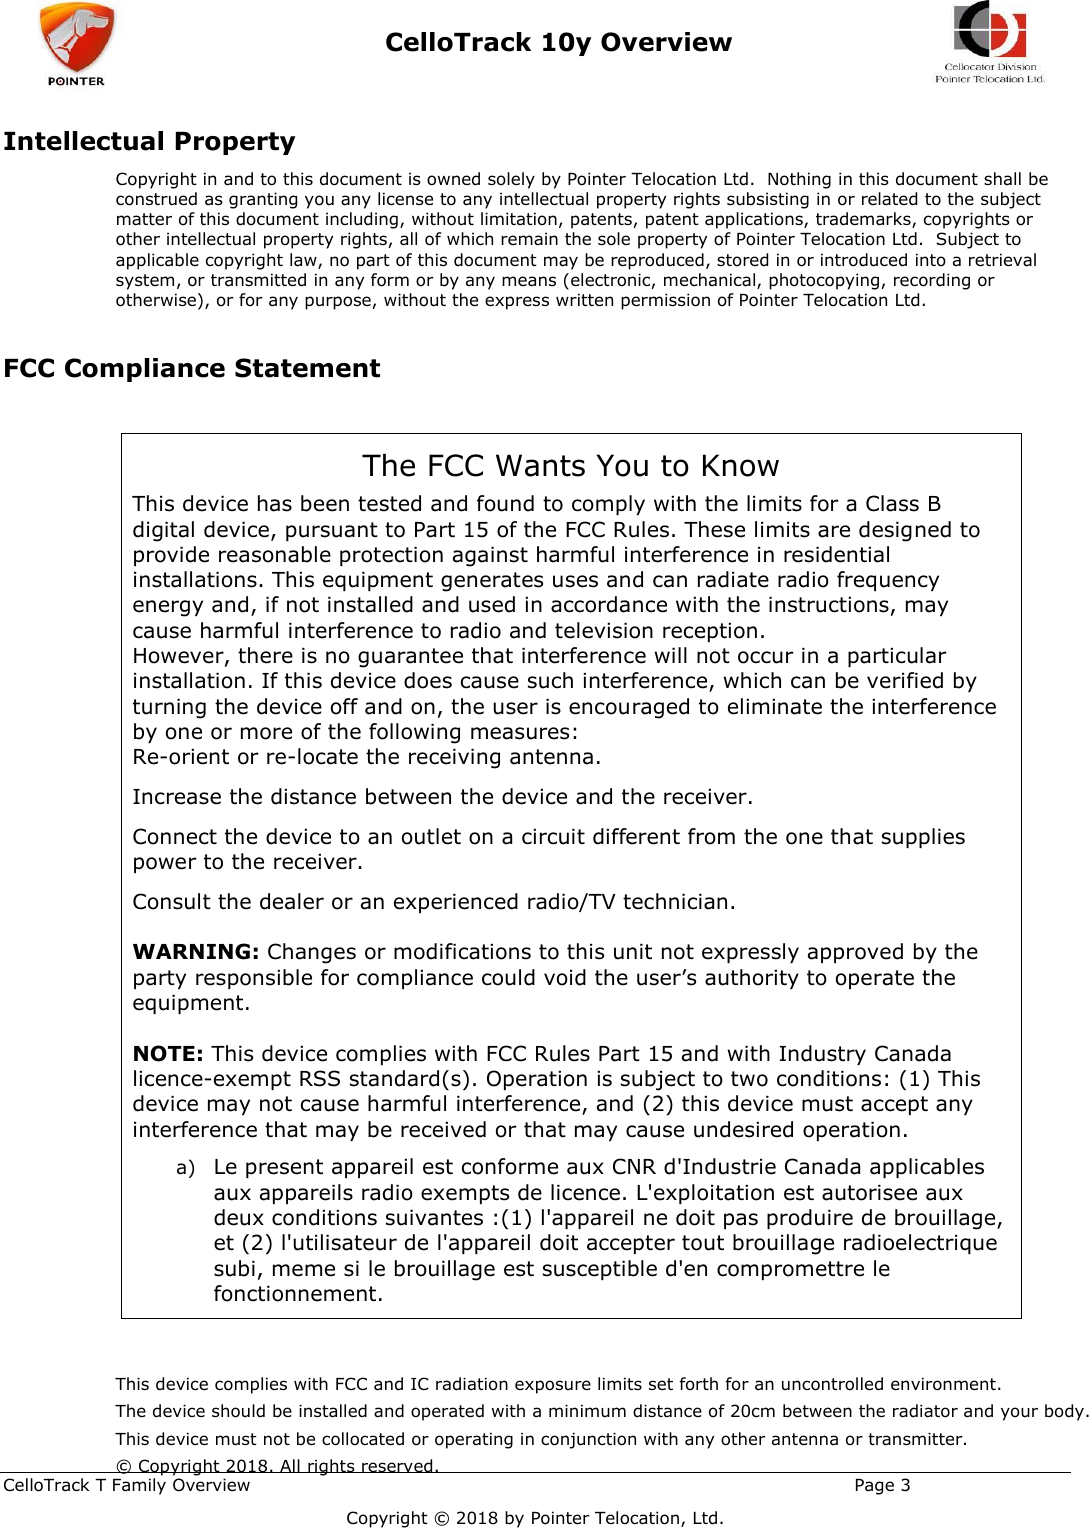  CelloTrack 10y Overview    CelloTrack T Family Overview                                                                                                       Page 3   Copyright © 2018 by Pointer Telocation, Ltd. Intellectual Property Copyright in and to this document is owned solely by Pointer Telocation Ltd.  Nothing in this document shall be construed as granting you any license to any intellectual property rights subsisting in or related to the subject matter of this document including, without limitation, patents, patent applications, trademarks, copyrights or other intellectual property rights, all of which remain the sole property of Pointer Telocation Ltd.  Subject to applicable copyright law, no part of this document may be reproduced, stored in or introduced into a retrieval system, or transmitted in any form or by any means (electronic, mechanical, photocopying, recording or otherwise), or for any purpose, without the express written permission of Pointer Telocation Ltd.   FCC Compliance Statement  The FCC Wants You to Know This device has been tested and found to comply with the limits for a Class B digital device, pursuant to Part 15 of the FCC Rules. These limits are designed to provide reasonable protection against harmful interference in residential installations. This equipment generates uses and can radiate radio frequency energy and, if not installed and used in accordance with the instructions, may cause harmful interference to radio and television reception.  However, there is no guarantee that interference will not occur in a particular installation. If this device does cause such interference, which can be verified by turning the device off and on, the user is encouraged to eliminate the interference by one or more of the following measures:  Re-orient or re-locate the receiving antenna.  Increase the distance between the device and the receiver.  Connect the device to an outlet on a circuit different from the one that supplies power to the receiver.  Consult the dealer or an experienced radio/TV technician.   WARNING: Changes or modifications to this unit not expressly approved by the party responsible for compliance could void the user’s authority to operate the equipment.   NOTE: This device complies with FCC Rules Part 15 and with Industry Canada licence-exempt RSS standard(s). Operation is subject to two conditions: (1) This device may not cause harmful interference, and (2) this device must accept any interference that may be received or that may cause undesired operation.  a) Le present appareil est conforme aux CNR d&apos;Industrie Canada applicables aux appareils radio exempts de licence. L&apos;exploitation est autorisee aux deux conditions suivantes :(1) l&apos;appareil ne doit pas produire de brouillage, et (2) l&apos;utilisateur de l&apos;appareil doit accepter tout brouillage radioelectrique subi, meme si le brouillage est susceptible d&apos;en compromettre le fonctionnement.  This device complies with FCC and IC radiation exposure limits set forth for an uncontrolled environment. The device should be installed and operated with a minimum distance of 20cm between the radiator and your body. This device must not be collocated or operating in conjunction with any other antenna or transmitter.© Copyright 2018. All rights reserved. 